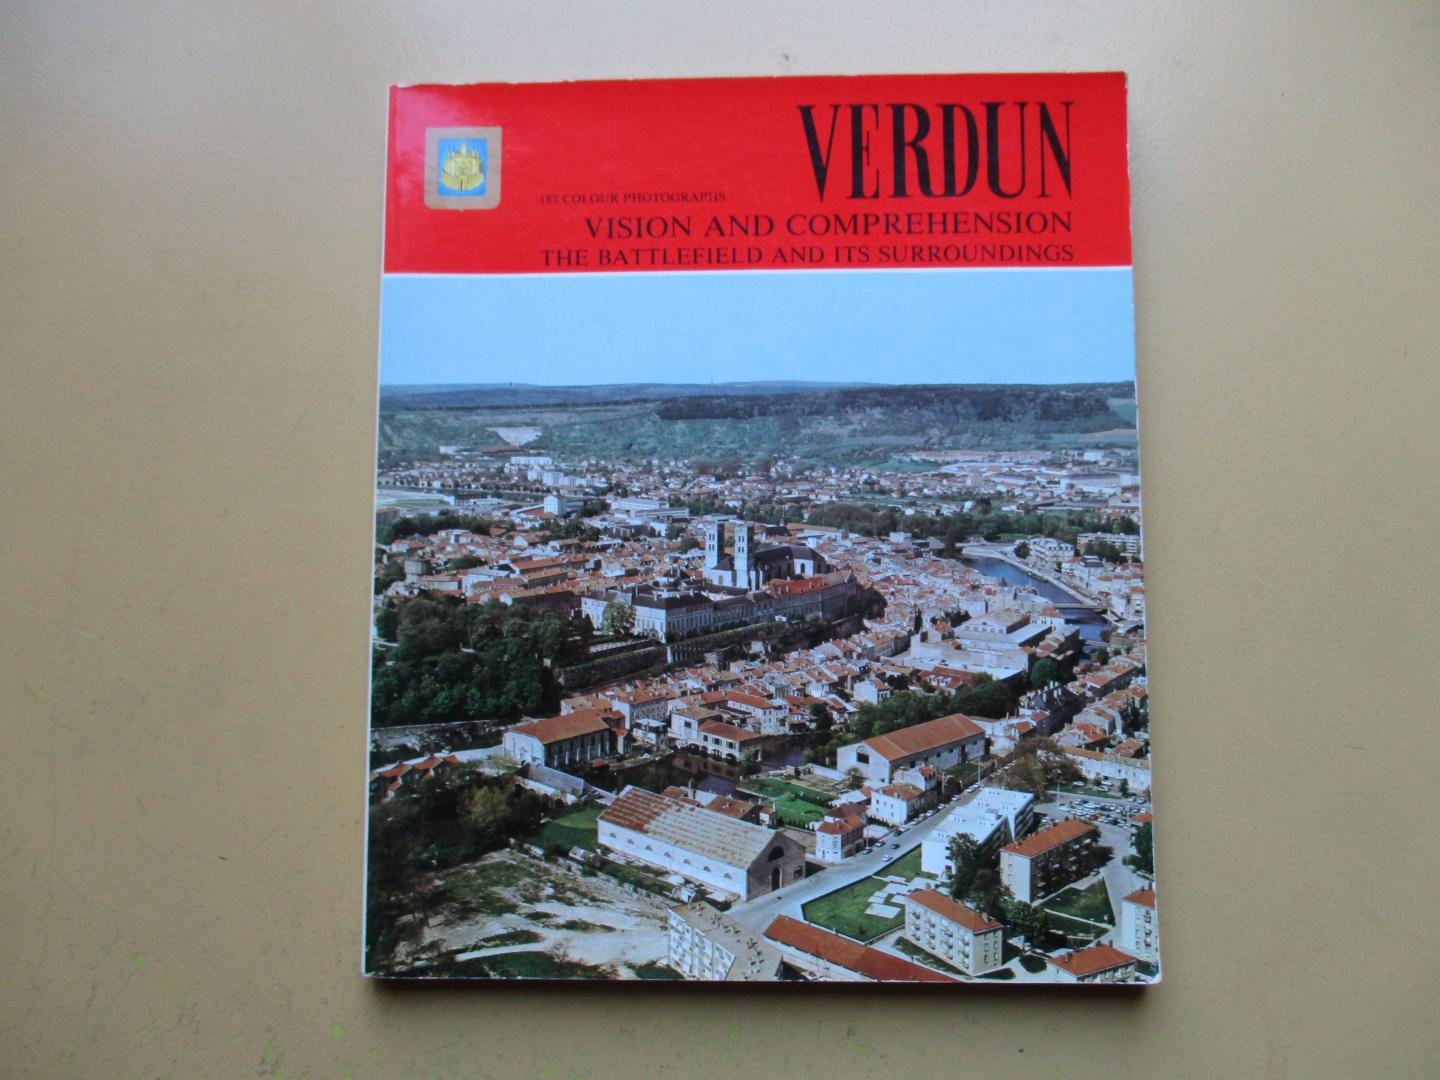 Diverse auteurs - Verdun, vision and comprehension / the battlefield and its surroundings